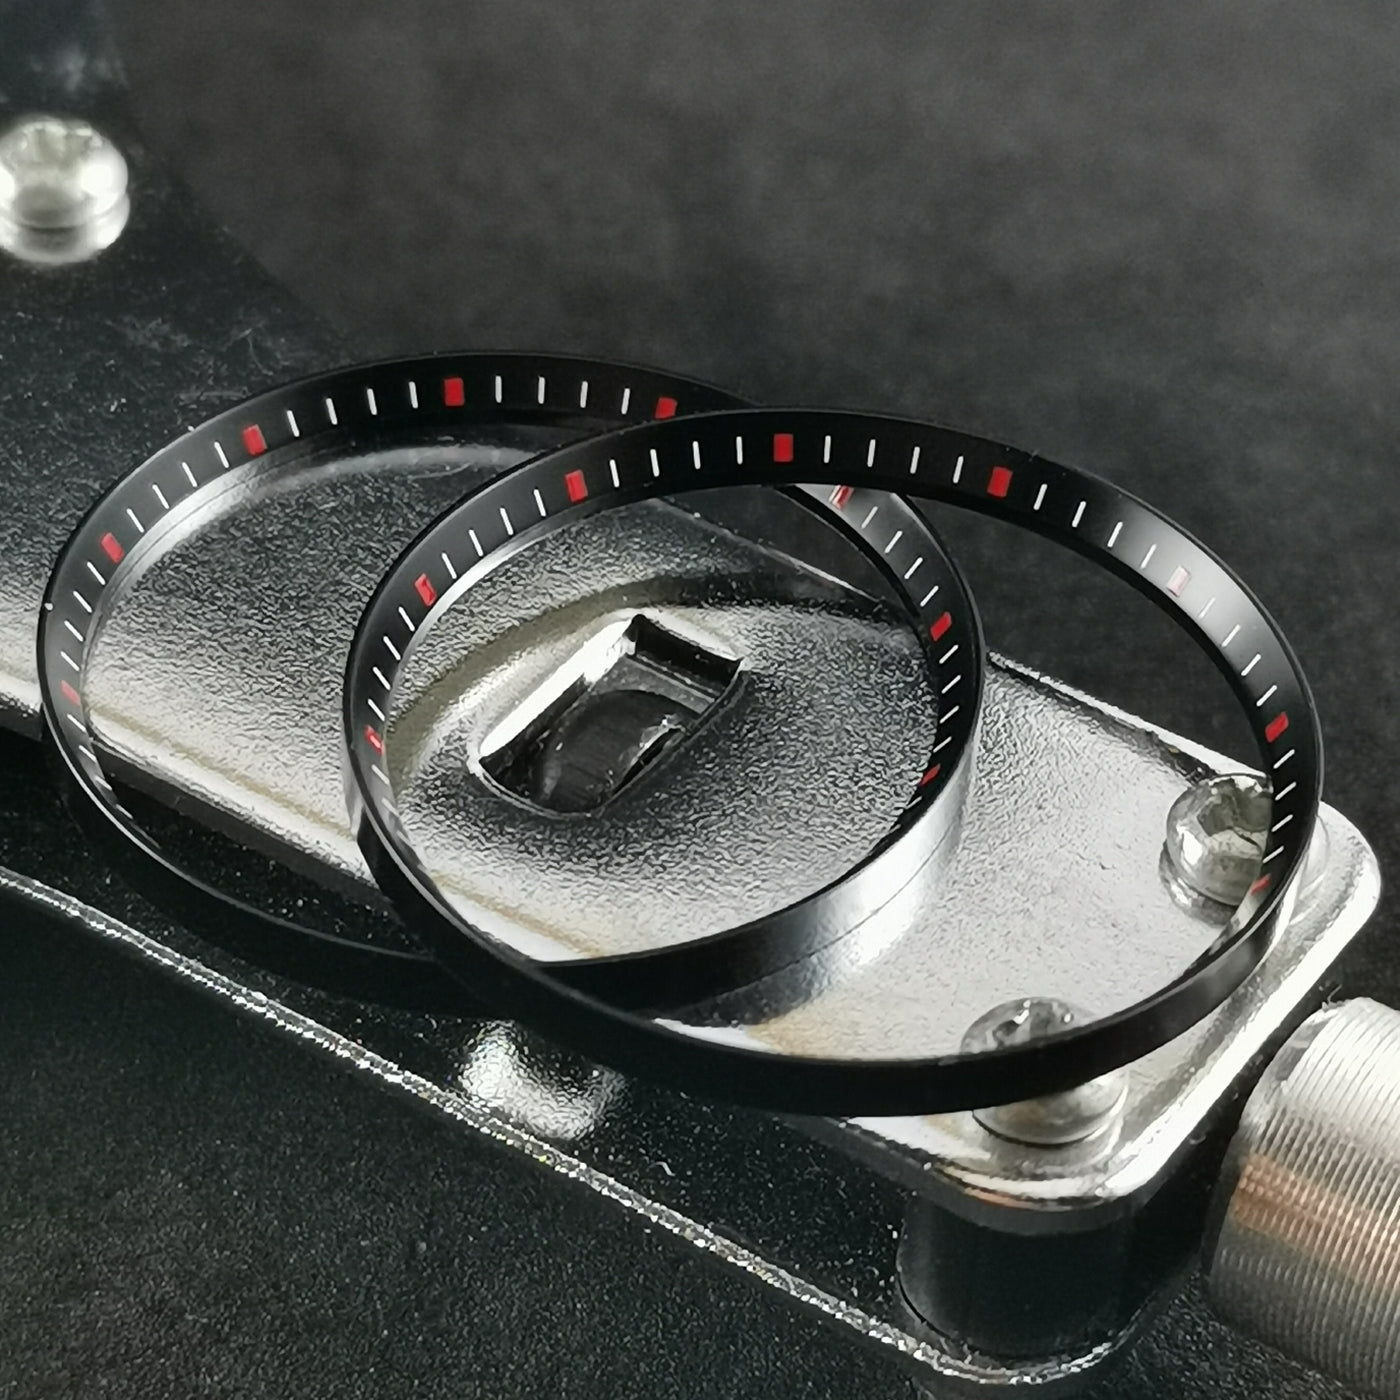 C0195 SKX007/SRPD Chapter Ring-Black with Red Marker